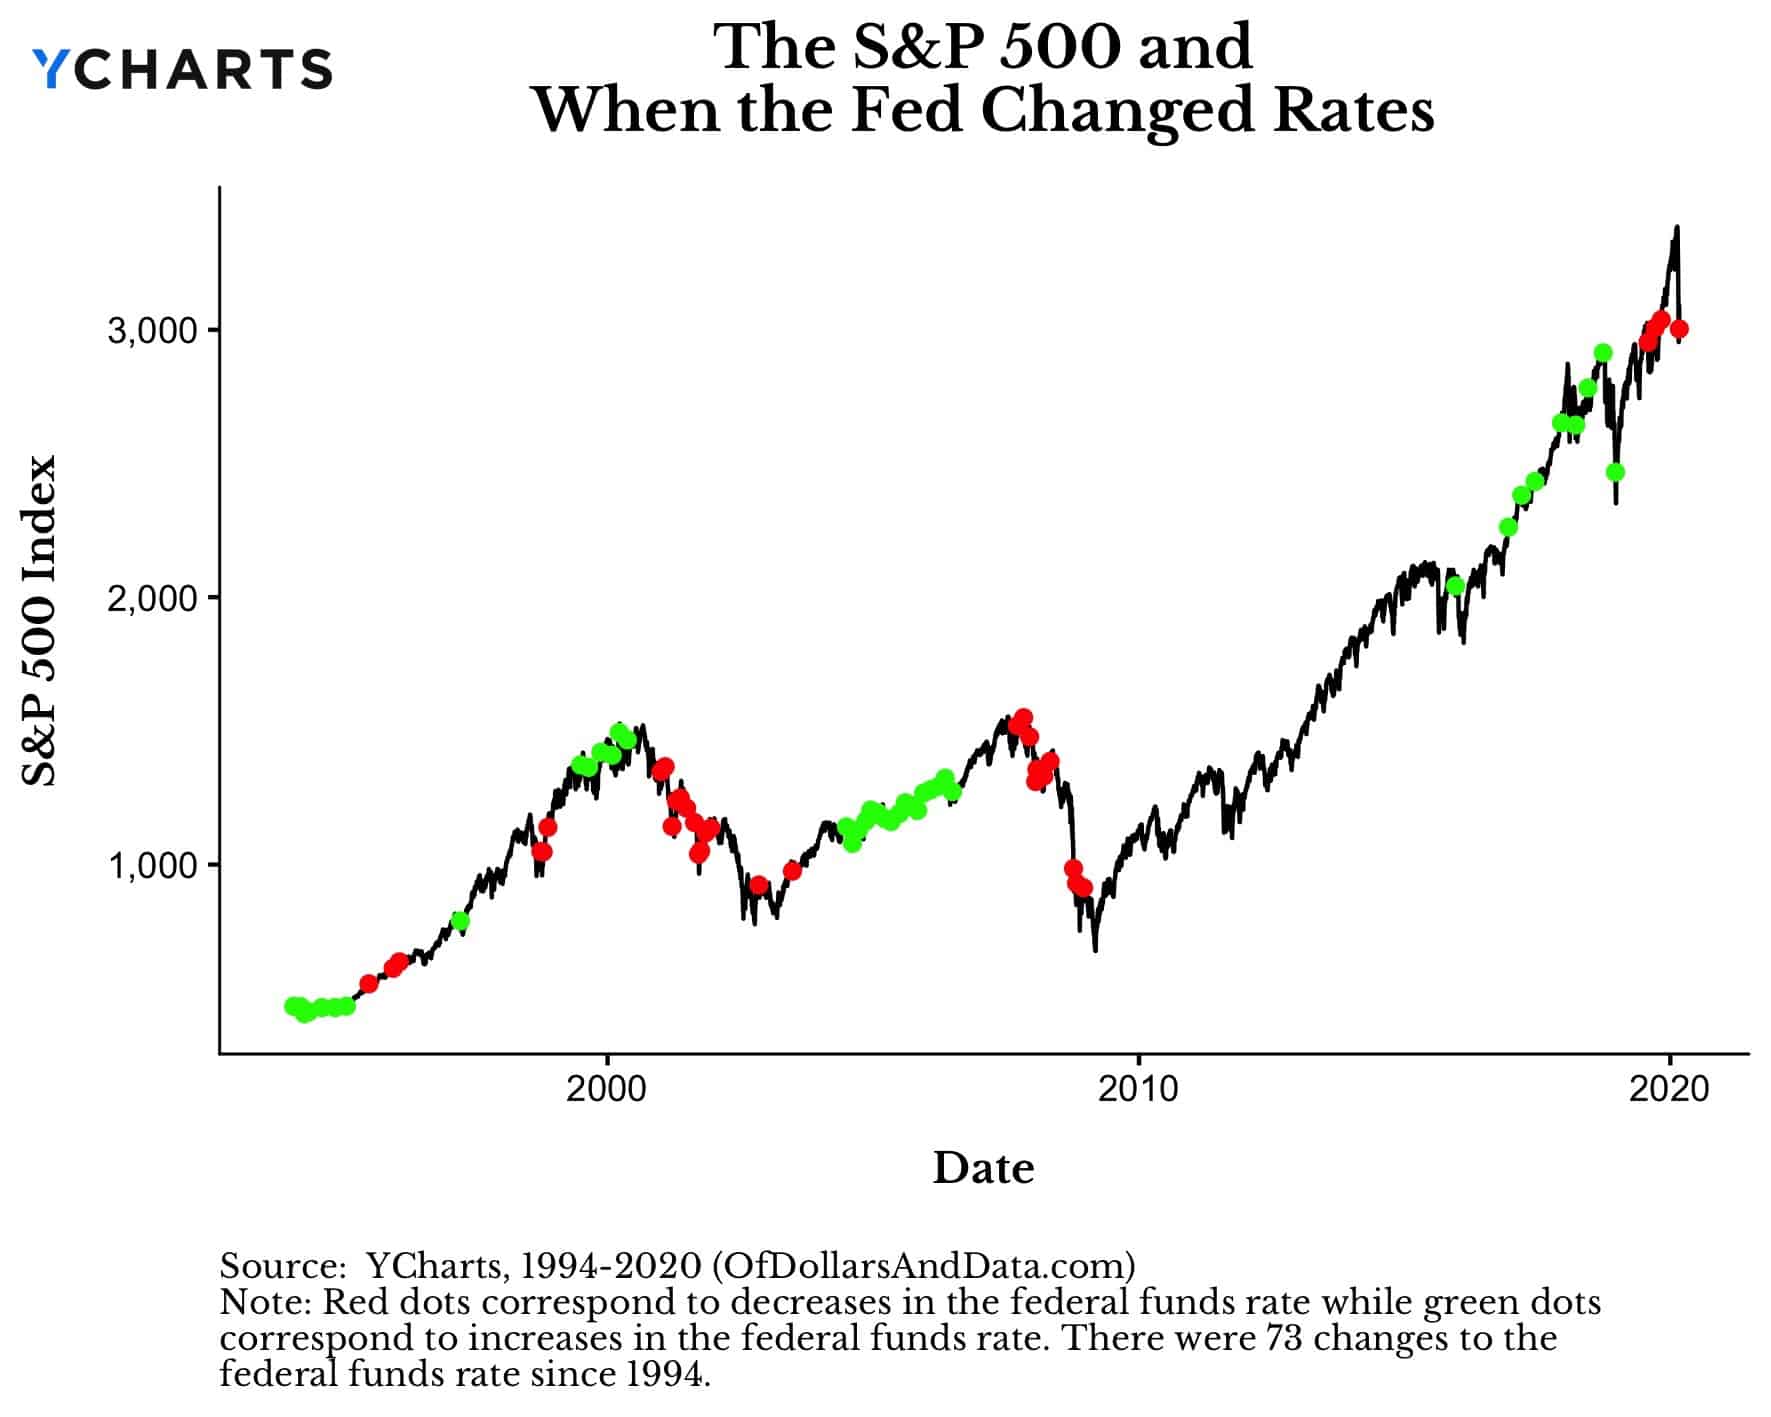 The S&P 500 and when the Fed changed rates